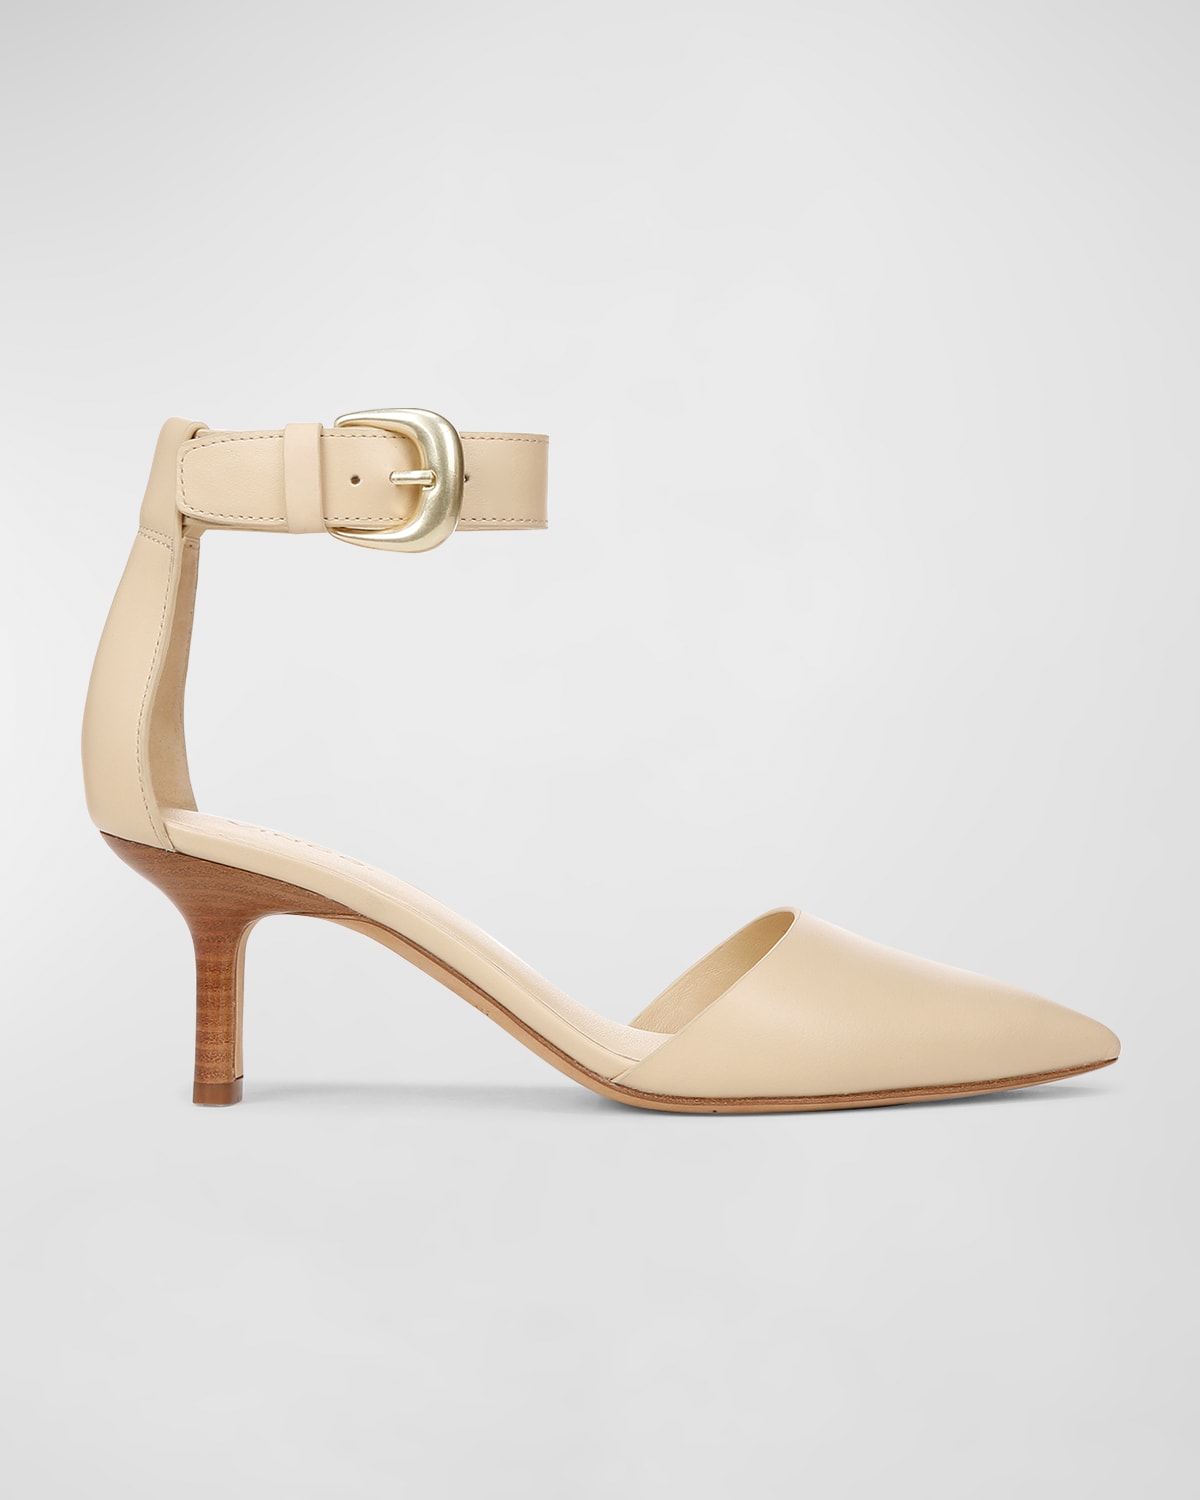 Perri Leather Ankle-Strap Pumps